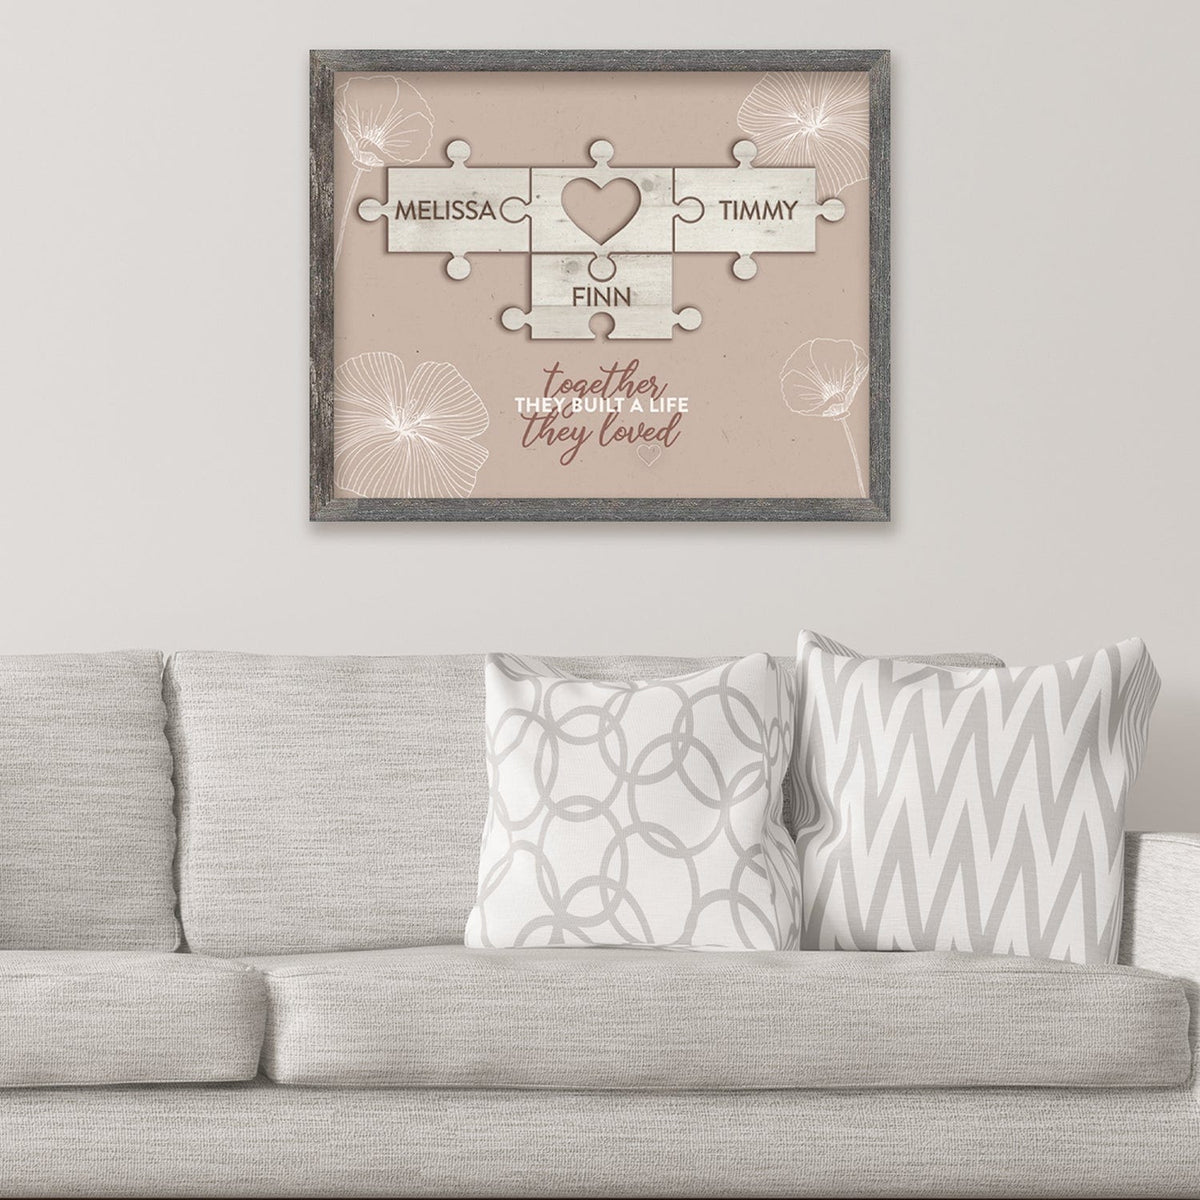 Personalized puzzle piece wall decor from Personal Prints